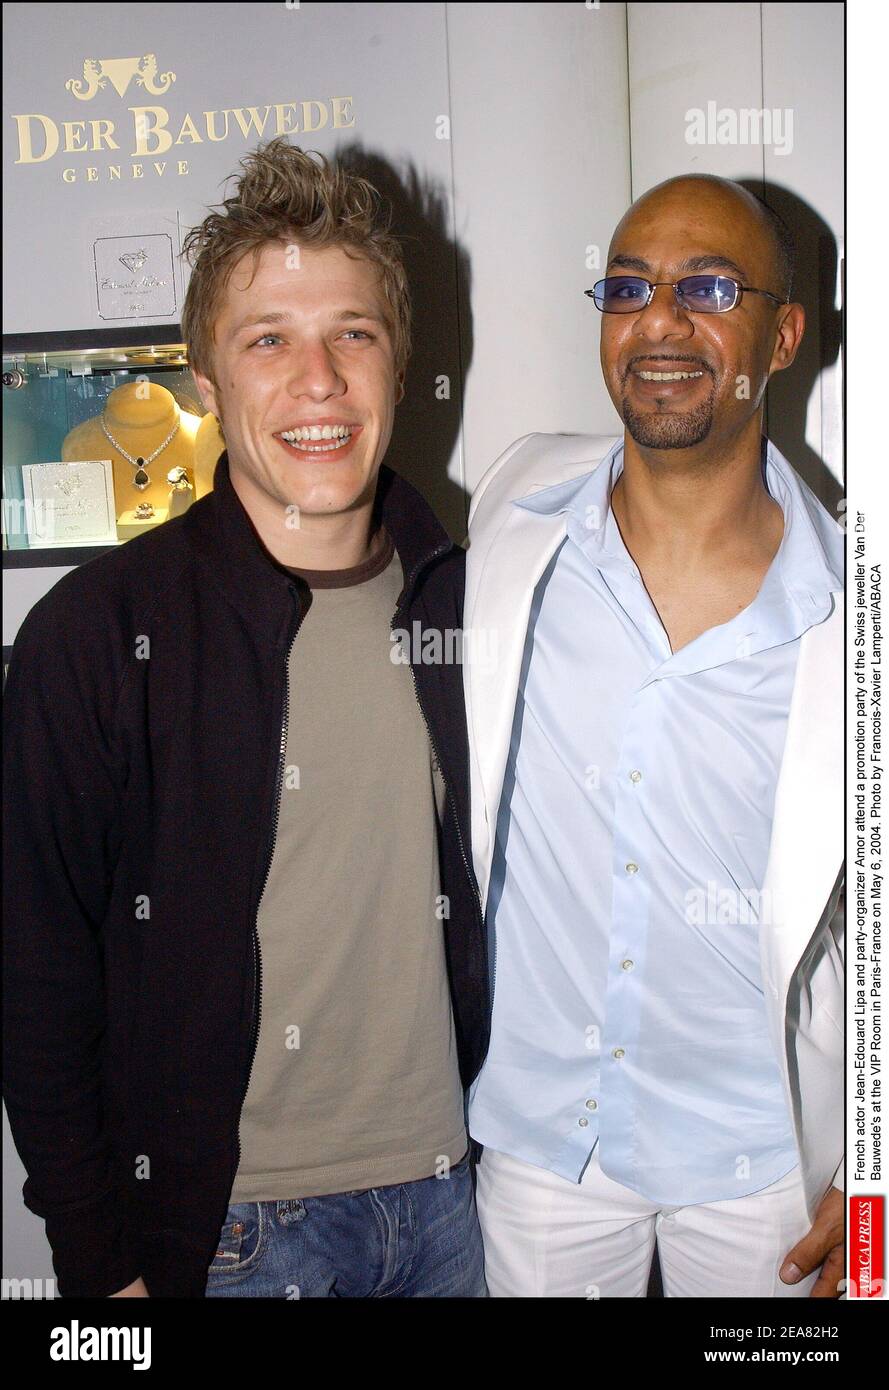 French actor Jean-Edouard Lipa and party-organizer Amor attend a promotion party of the Swiss jeweller Van Der Bauwede's at the VIP Room in Paris-France on May 6, 2004. Photo by Francois-Xavier Lamperti/ABACA Stock Photo